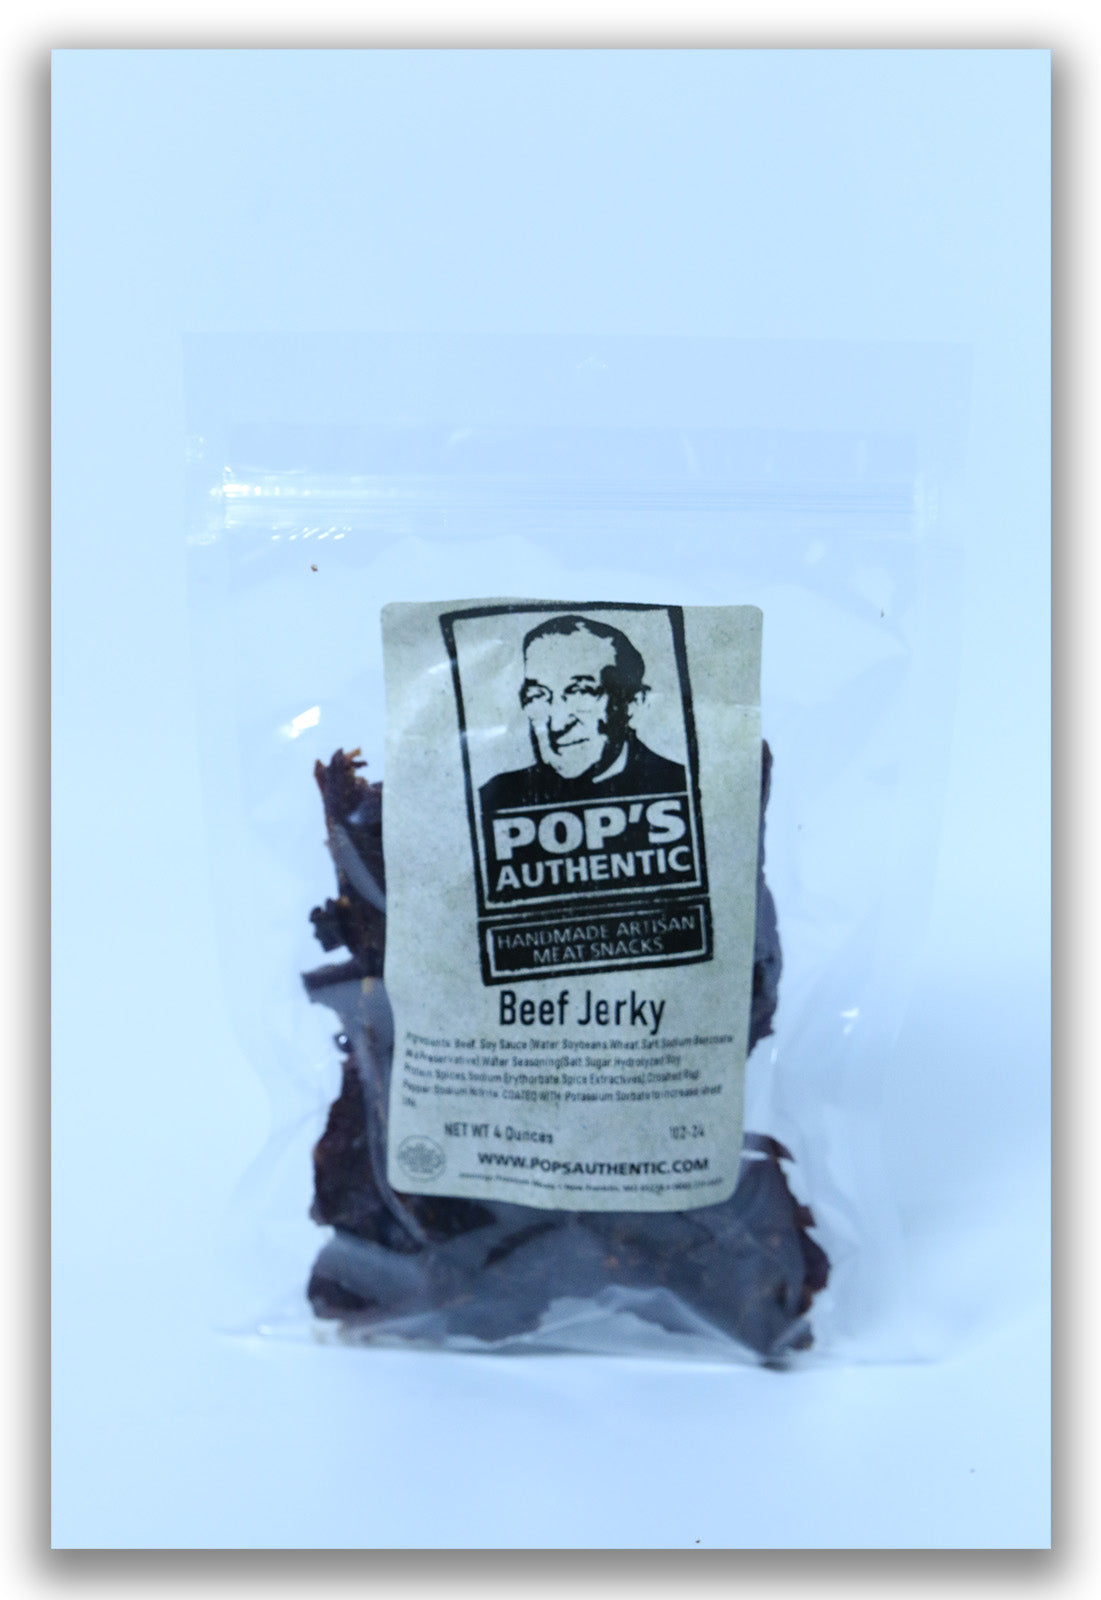 Original beef jerky in a four ounce package